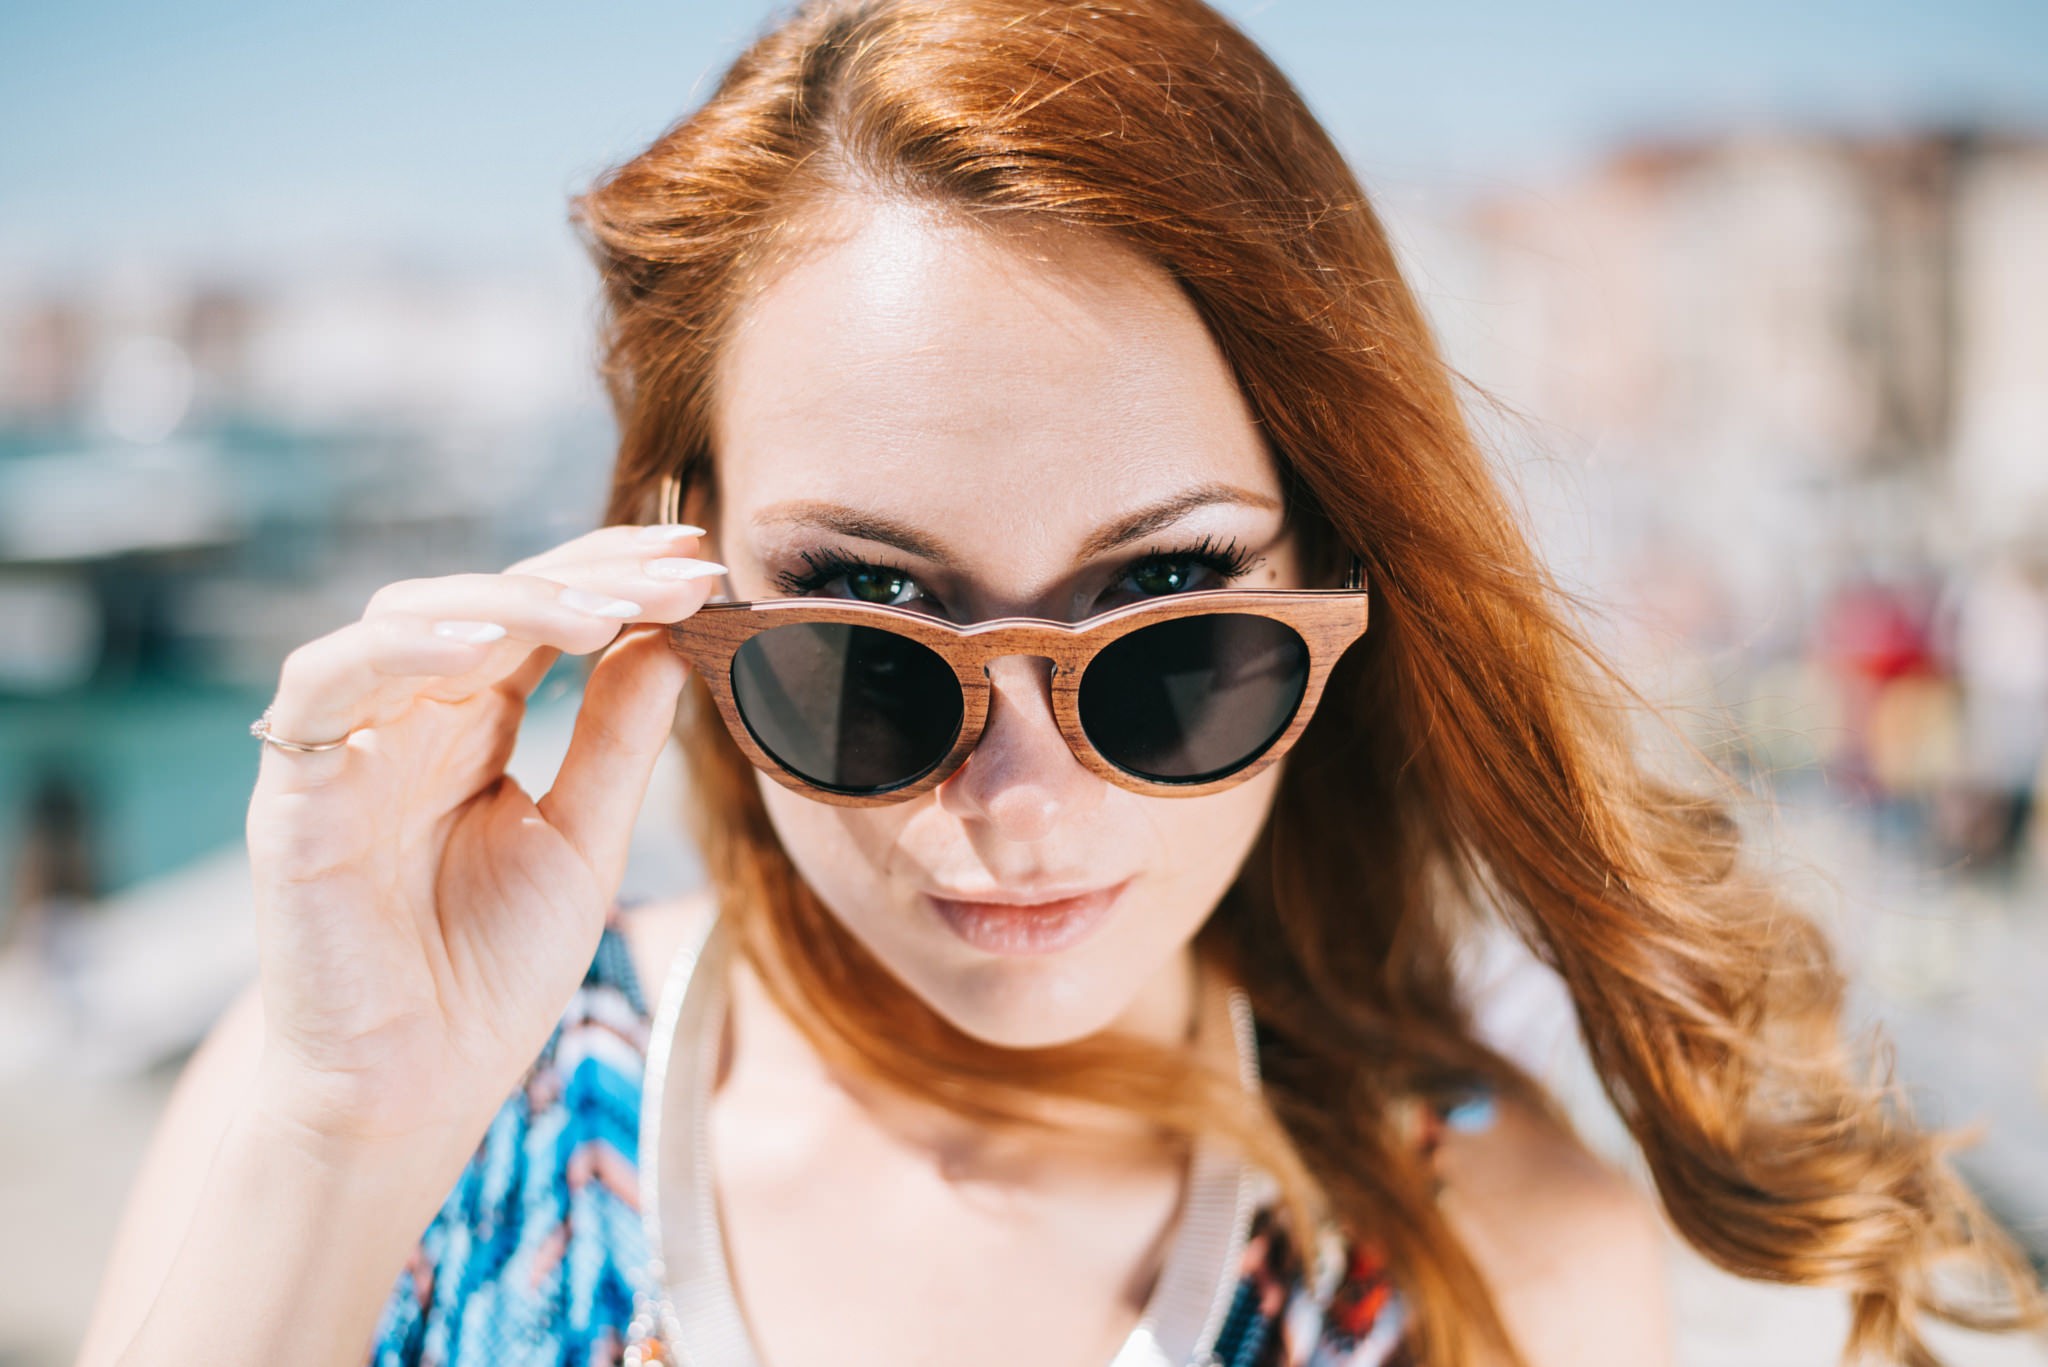 Women Redhead Face Portrait Women With Glasses Touching Glasses 2048x1367